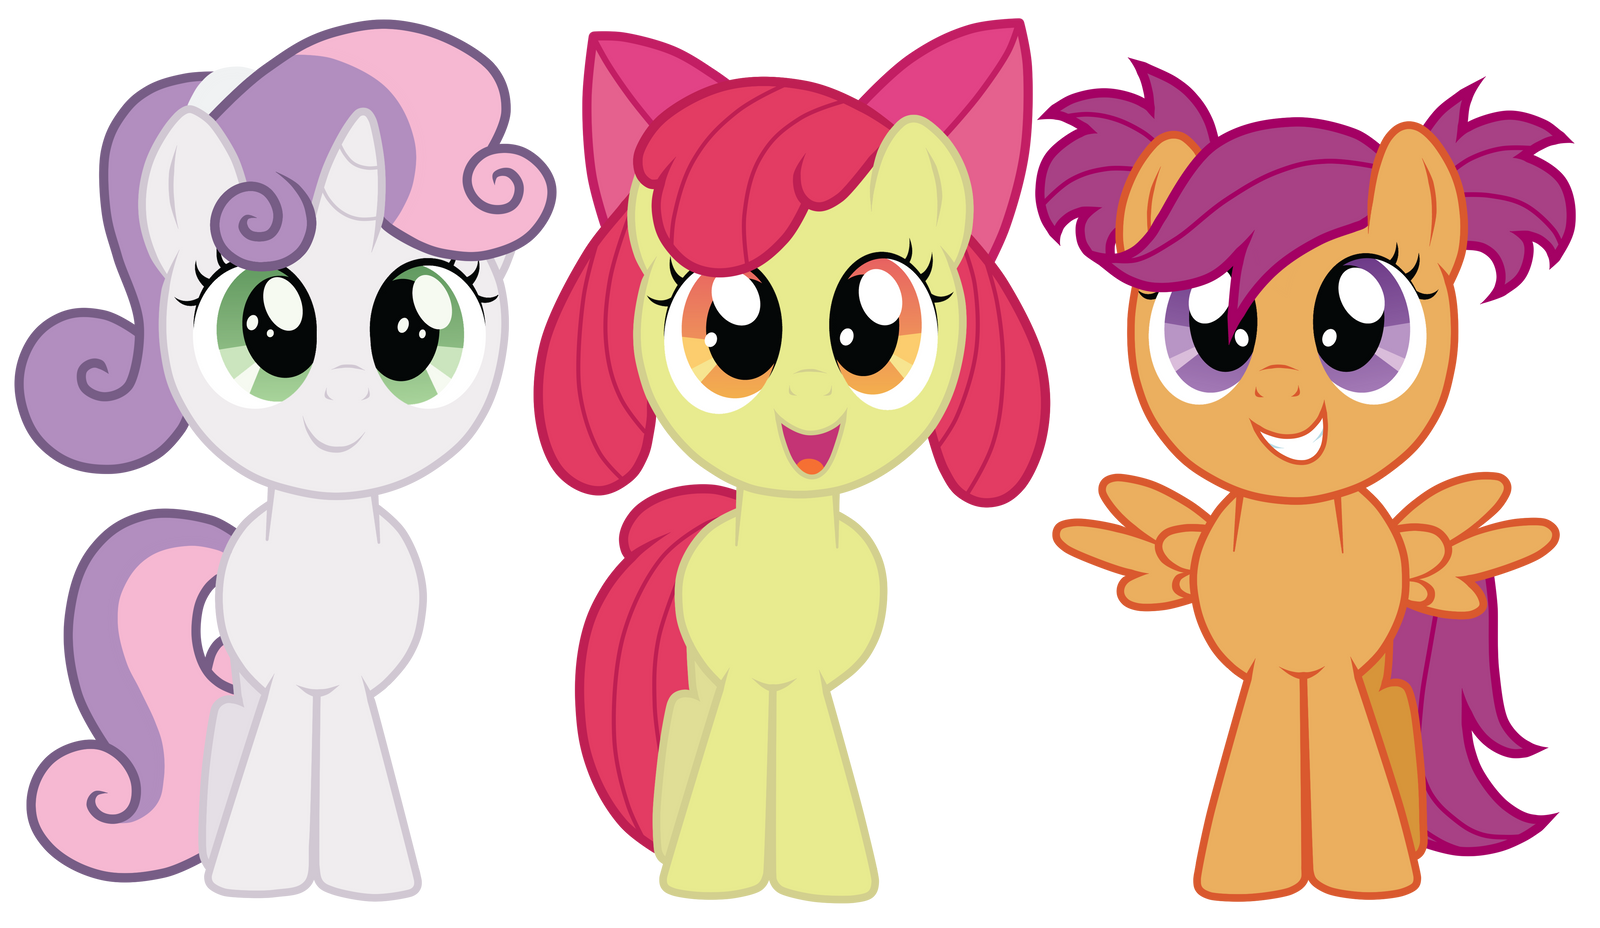 cmc_with_pigtails_by_jennieoo-d5x964r.pn